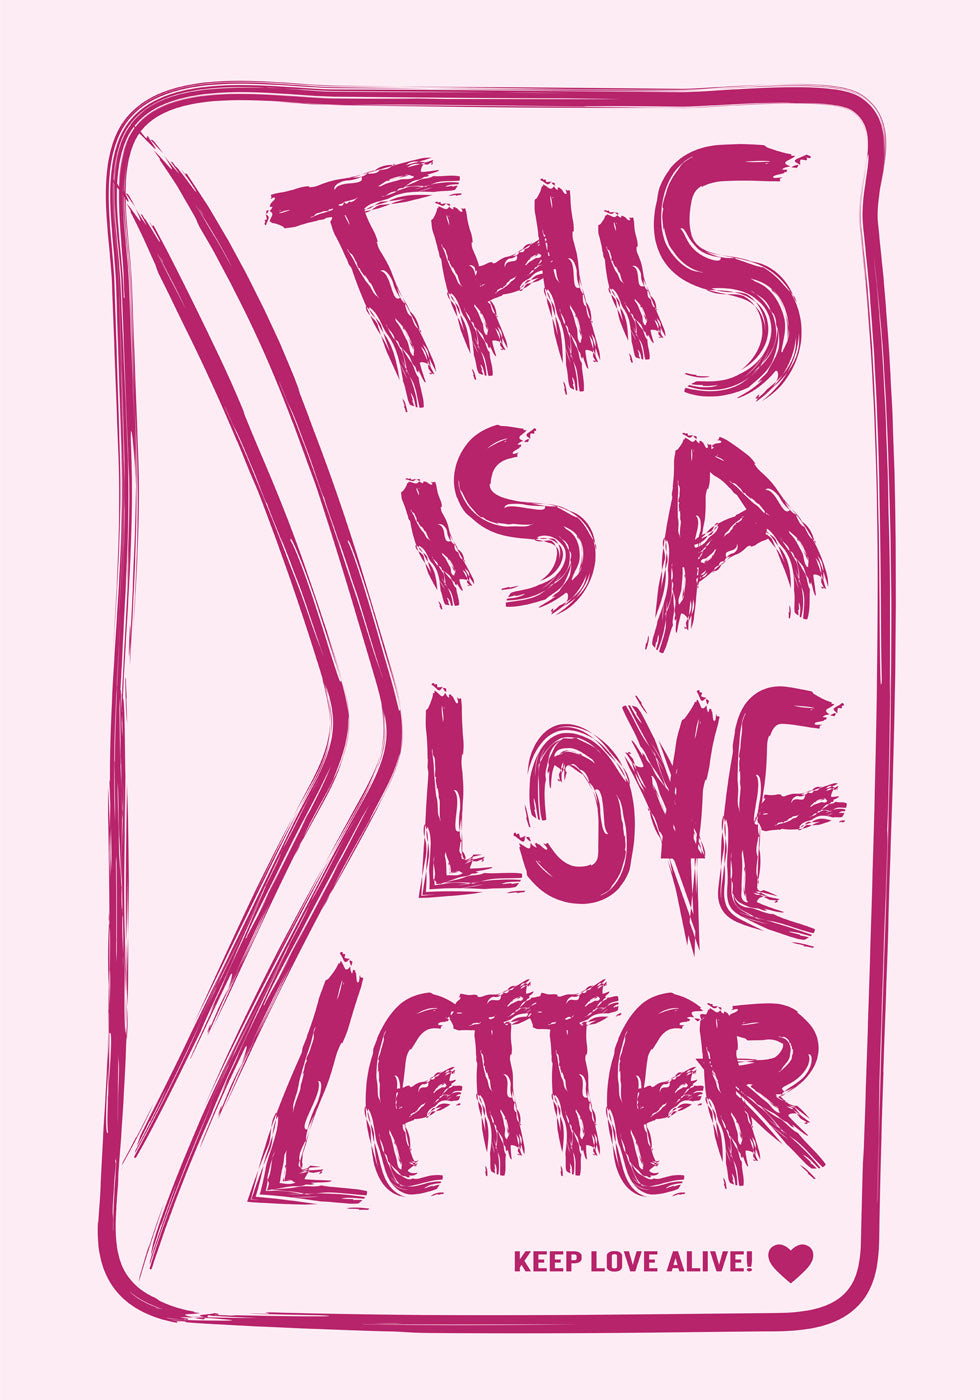 This Is a Love Letter Poster